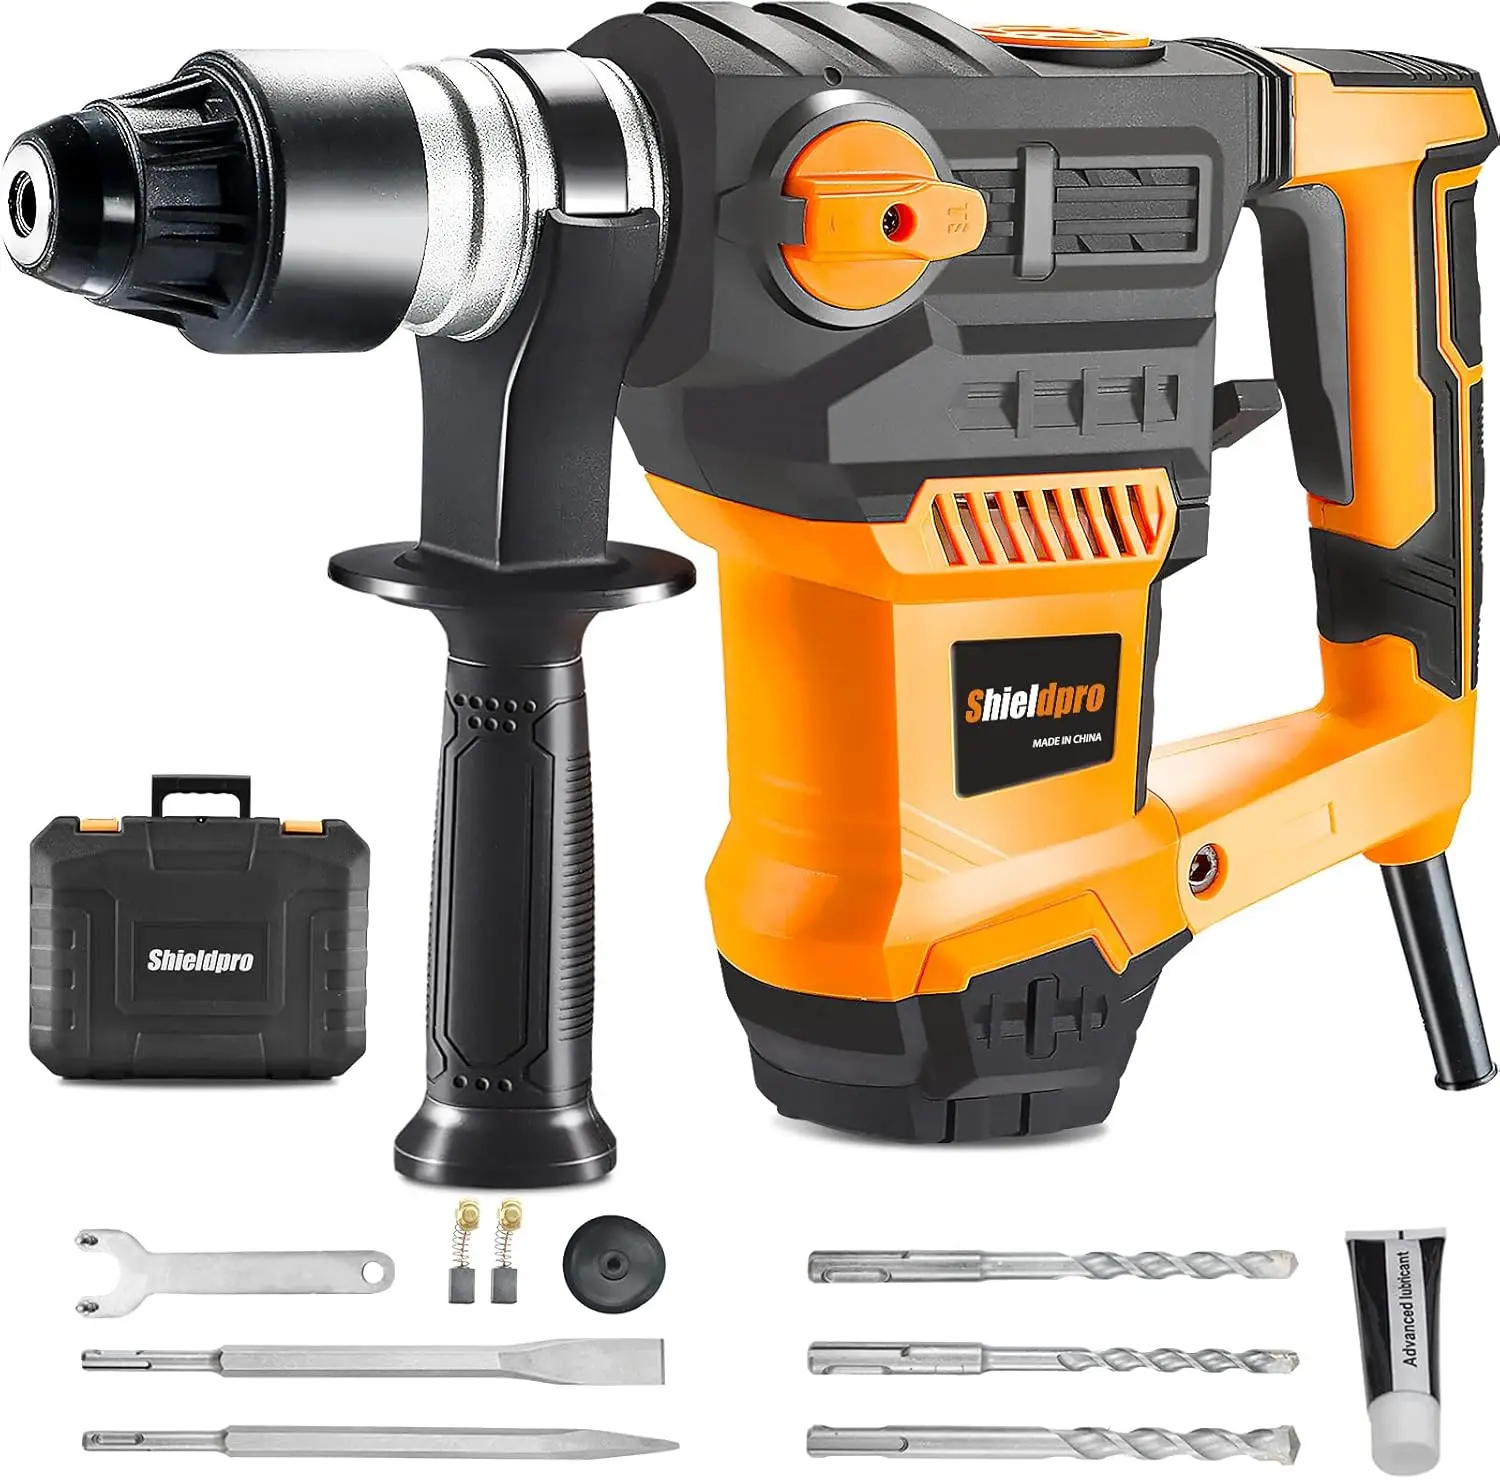 

1-1/4 Inch SDS-Plus 13 Amp Rotary Hammer Drill Heavy Duty, Safety Clutch 3 Functions with Vibration Control,Including Grease